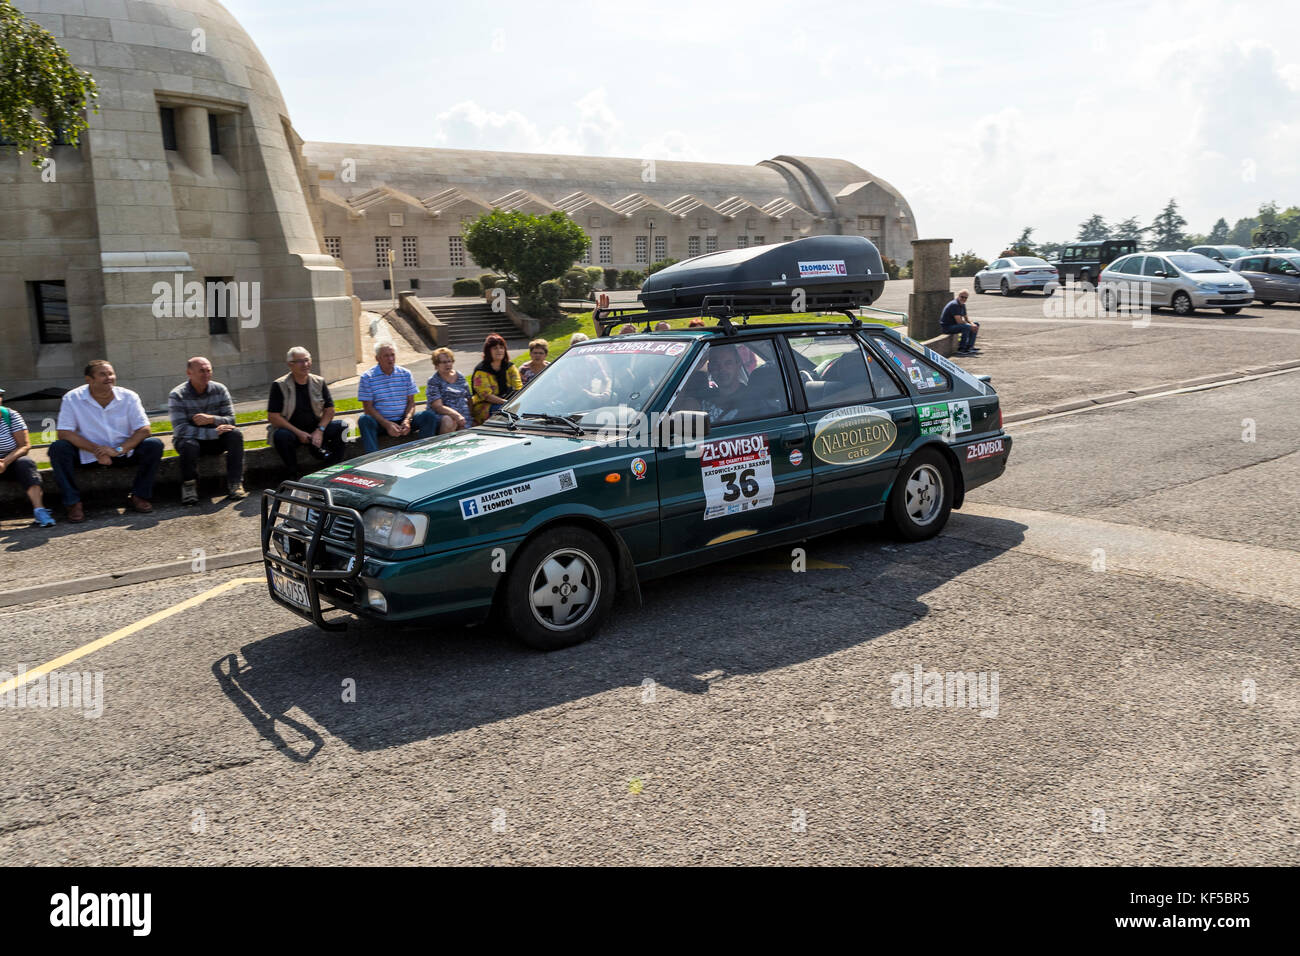 Cars on a rally. The Douaumont ossuary, national cemetery and memorial site, including Trench du Bayonette, France. Stock Photo